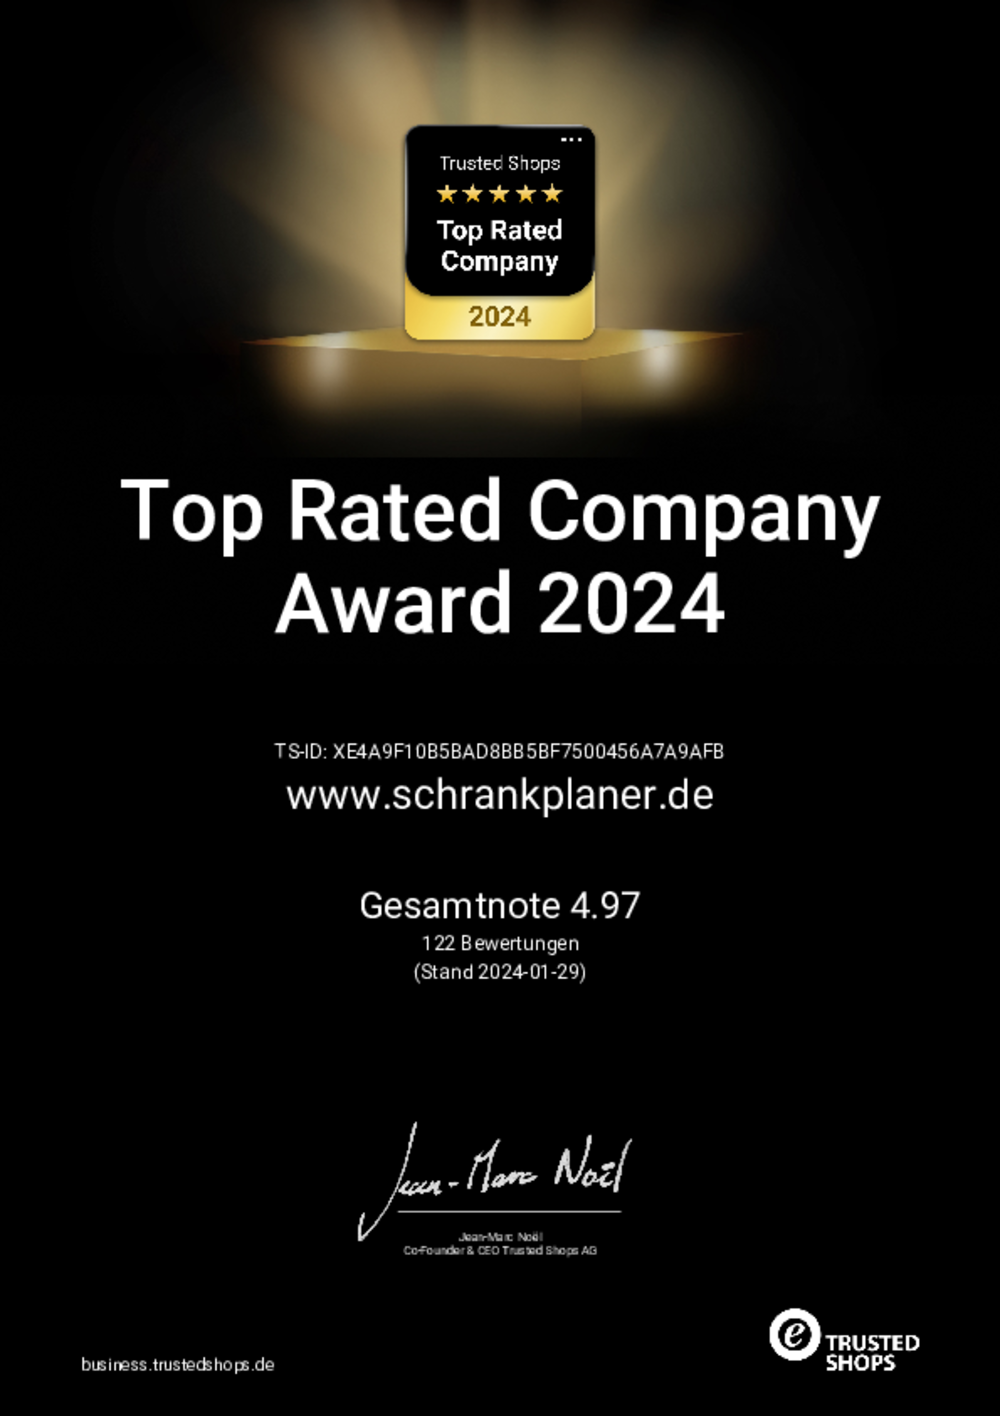 Top Rated Company Trusted Shops 2024